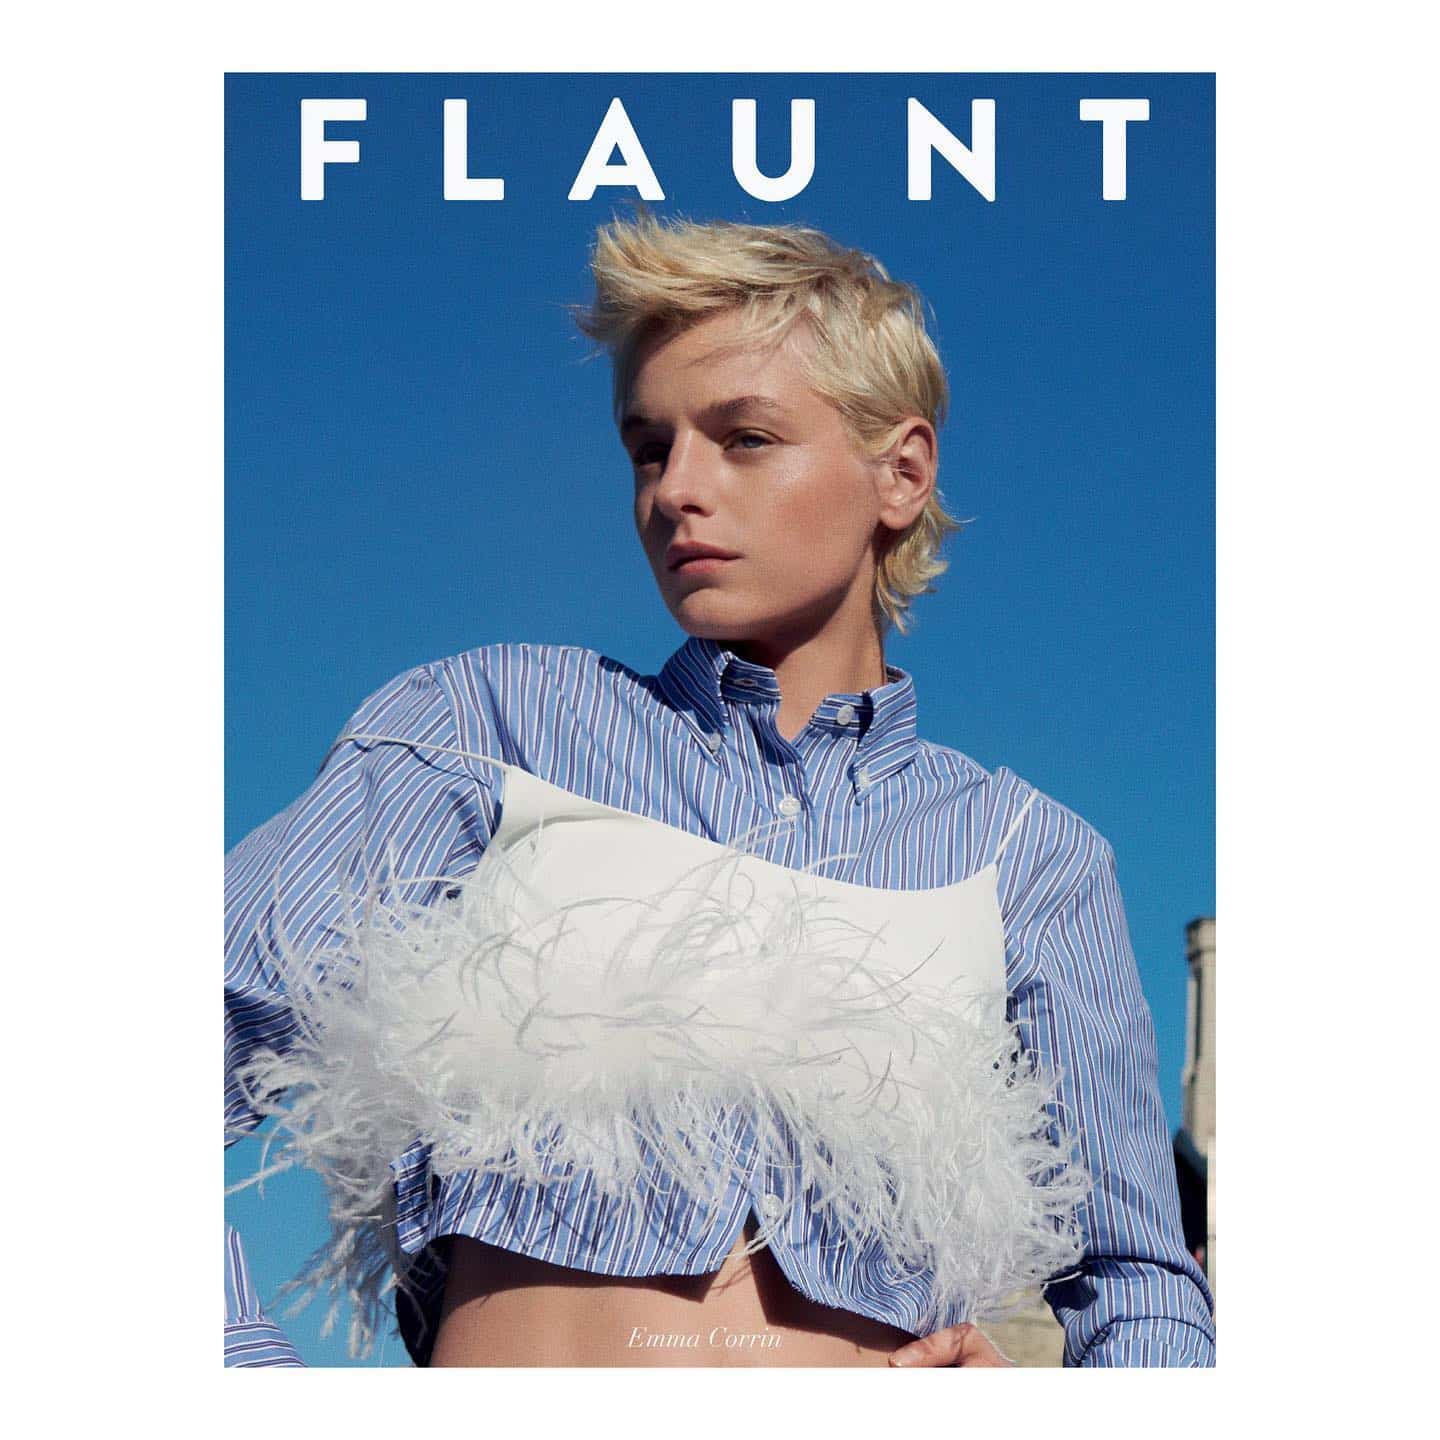 ️ @emmalouisecorrin on the cover of @flauntmagazine in @miumiu discussing - on @primevideo now ️
.
.
.
.

Photographed by @Federicodeangelisphotography
Styled by @MuiHai featuring @MiuMiu 
Written by @HannahJacksuhn
Hair: @CiaMandarello
Makeup: @MarcelloGutierrez